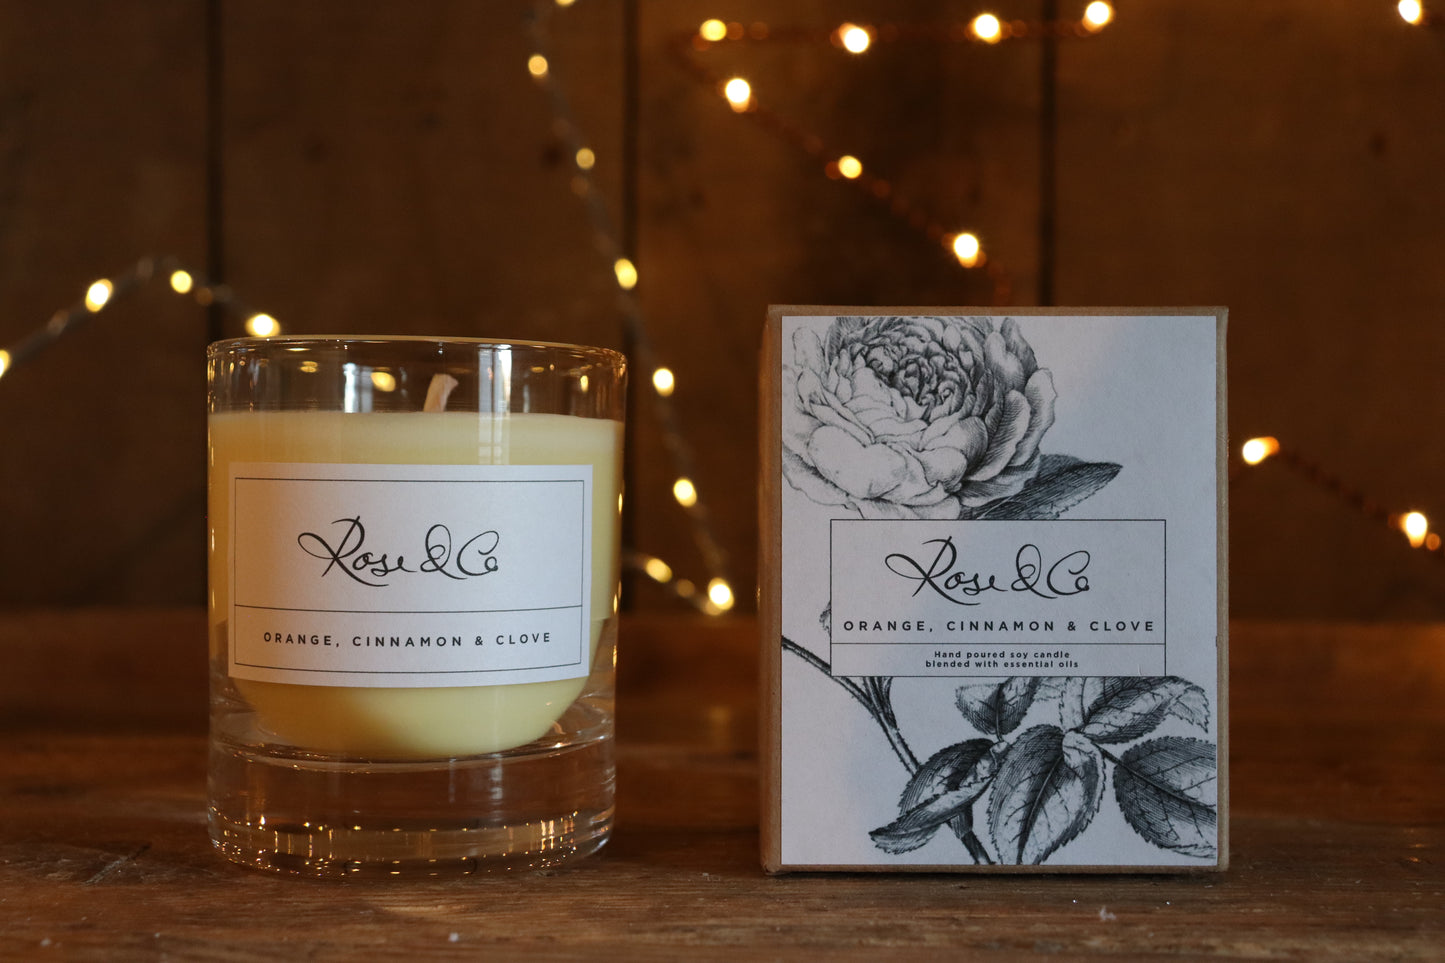 Rose & Co Orange, Cinnamon & Clove soy-wax, glass candle with essential oils